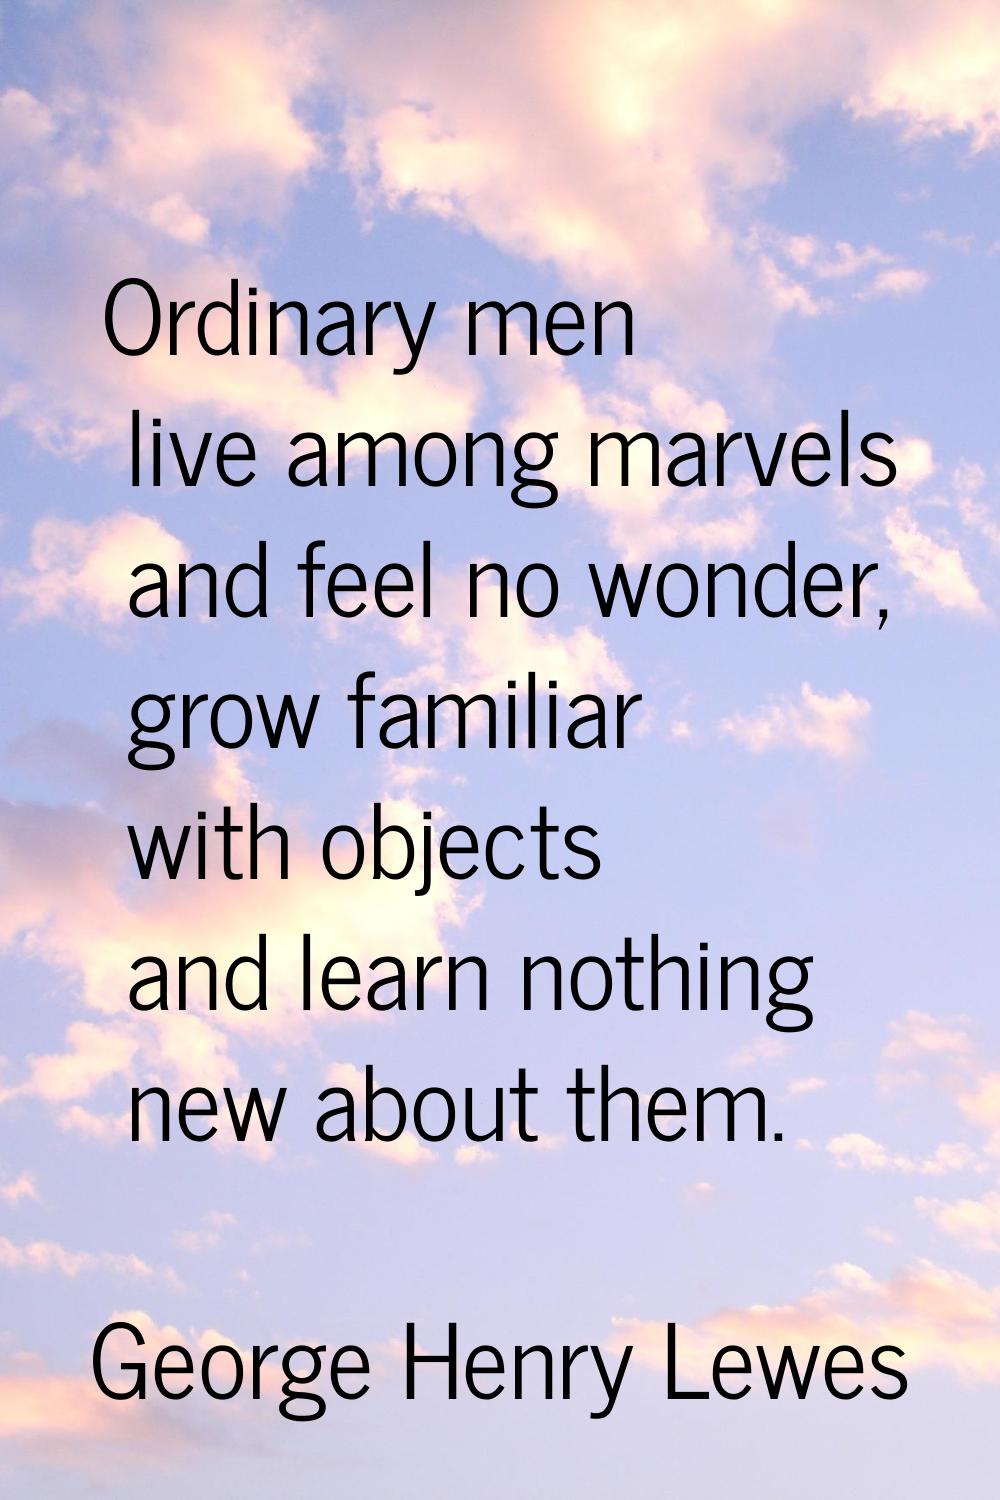 Ordinary men live among marvels and feel no wonder, grow familiar with objects and learn nothing ne